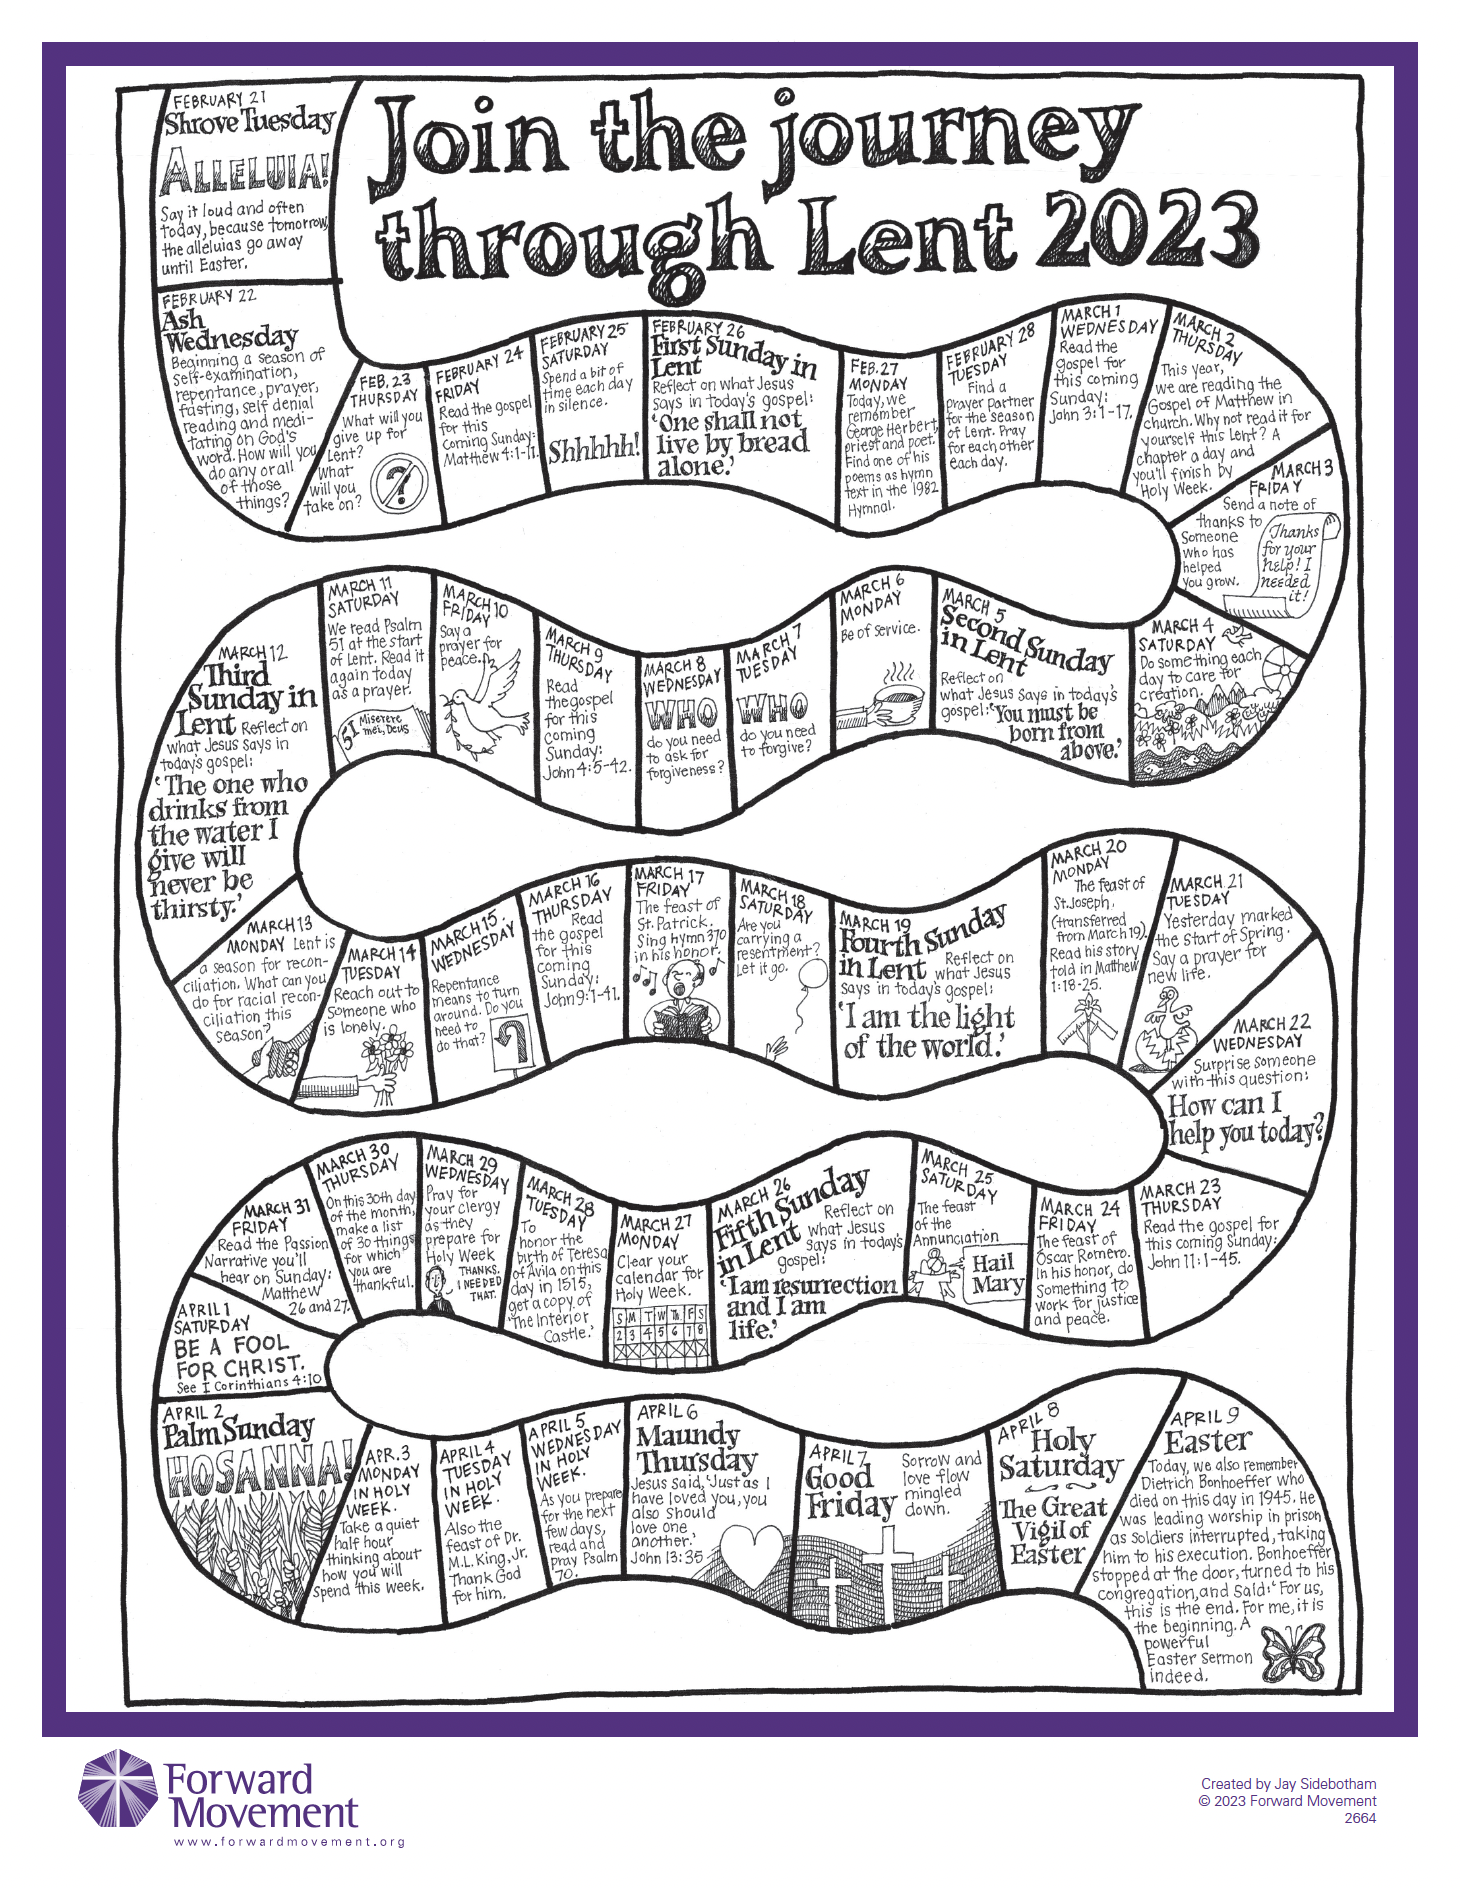 Join the Journey through Lent